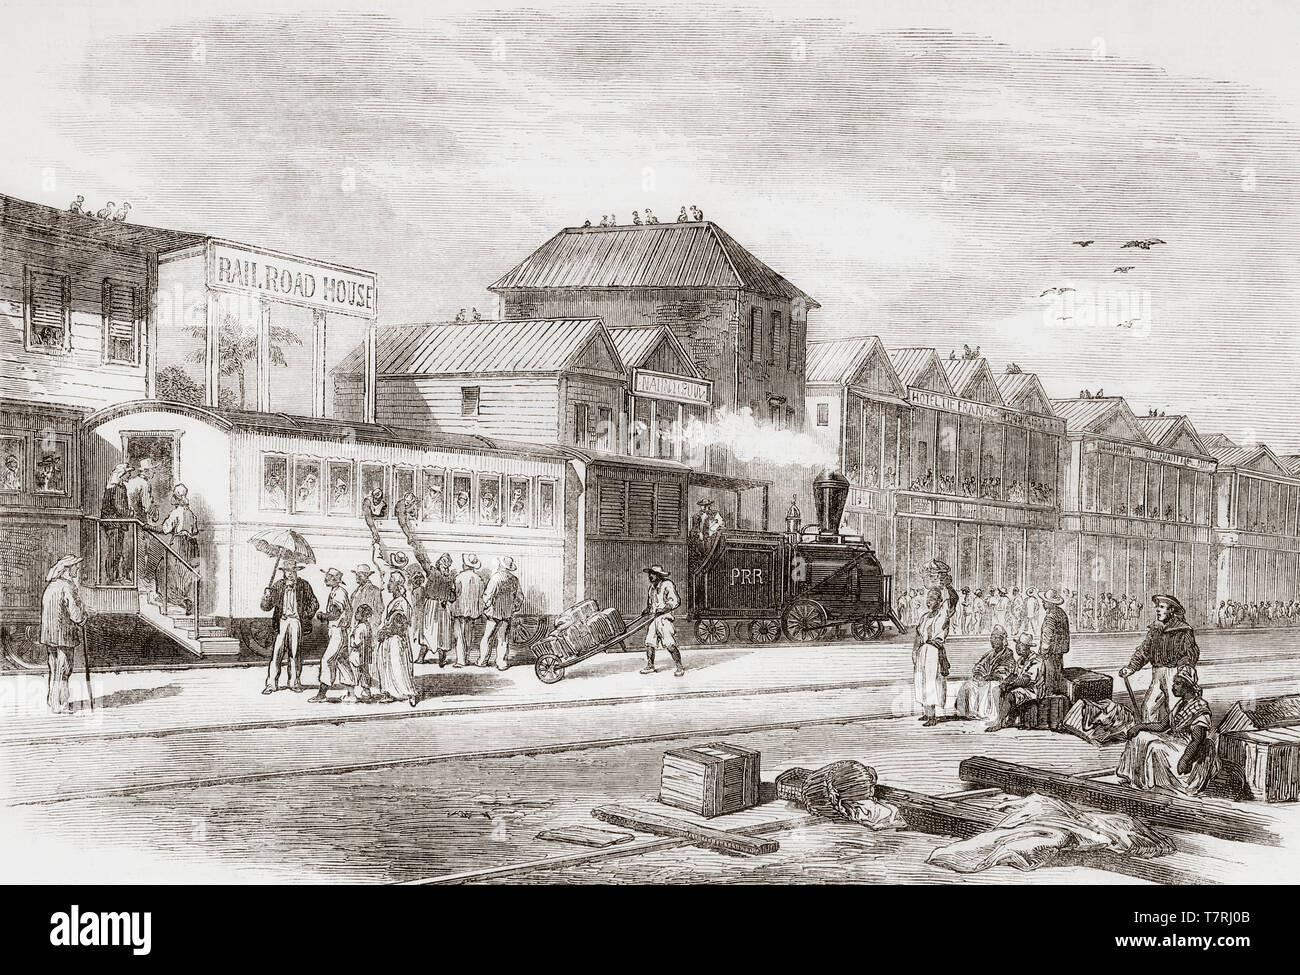 Aspinwall, ( present day Colon) Central America.  The train leaving for Panama.  From The Illustrated London News, published 1865. Stock Photo